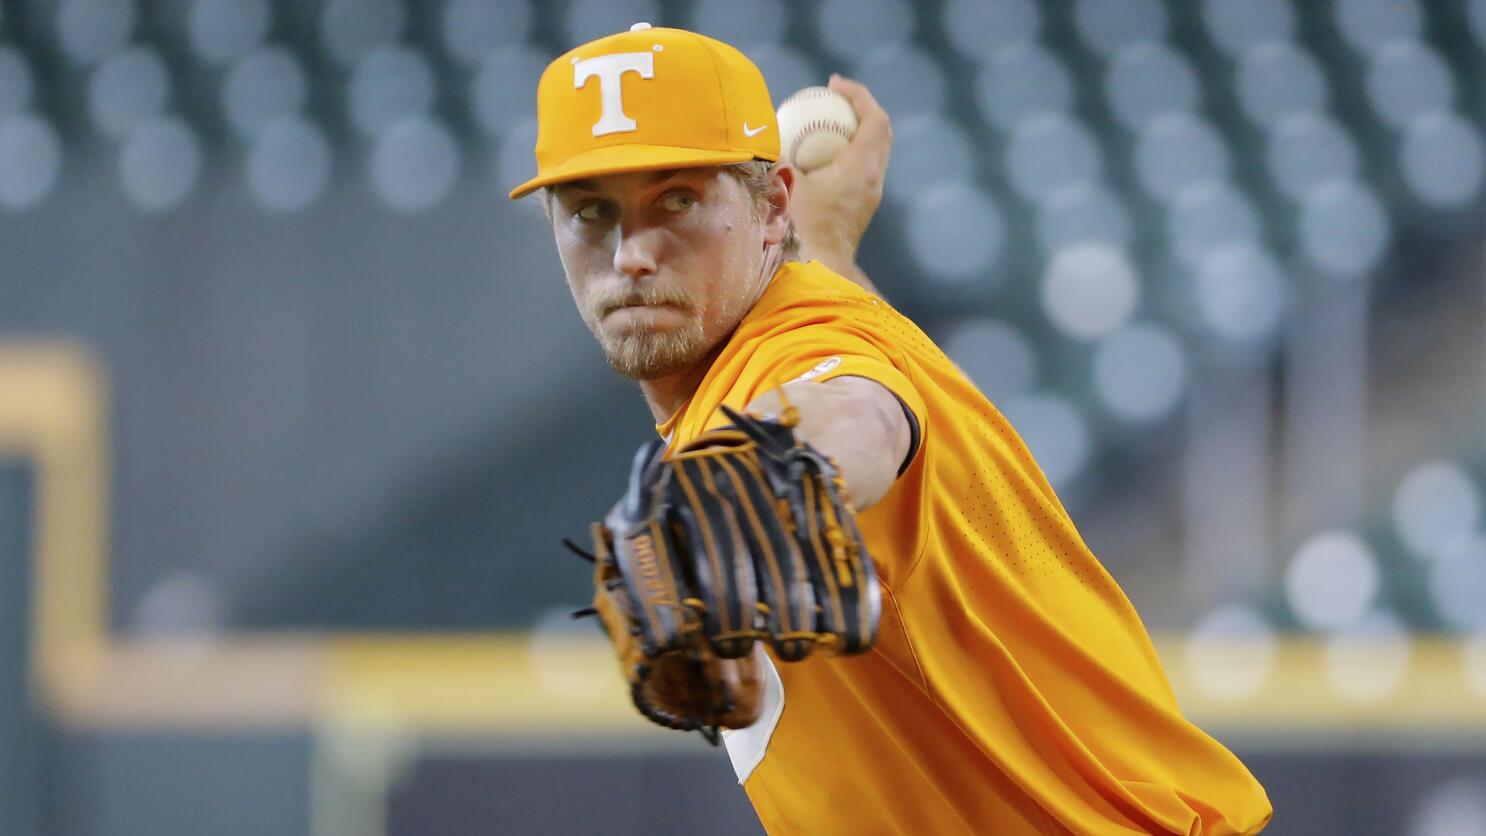 6 Vols to watch in the MLB Draft